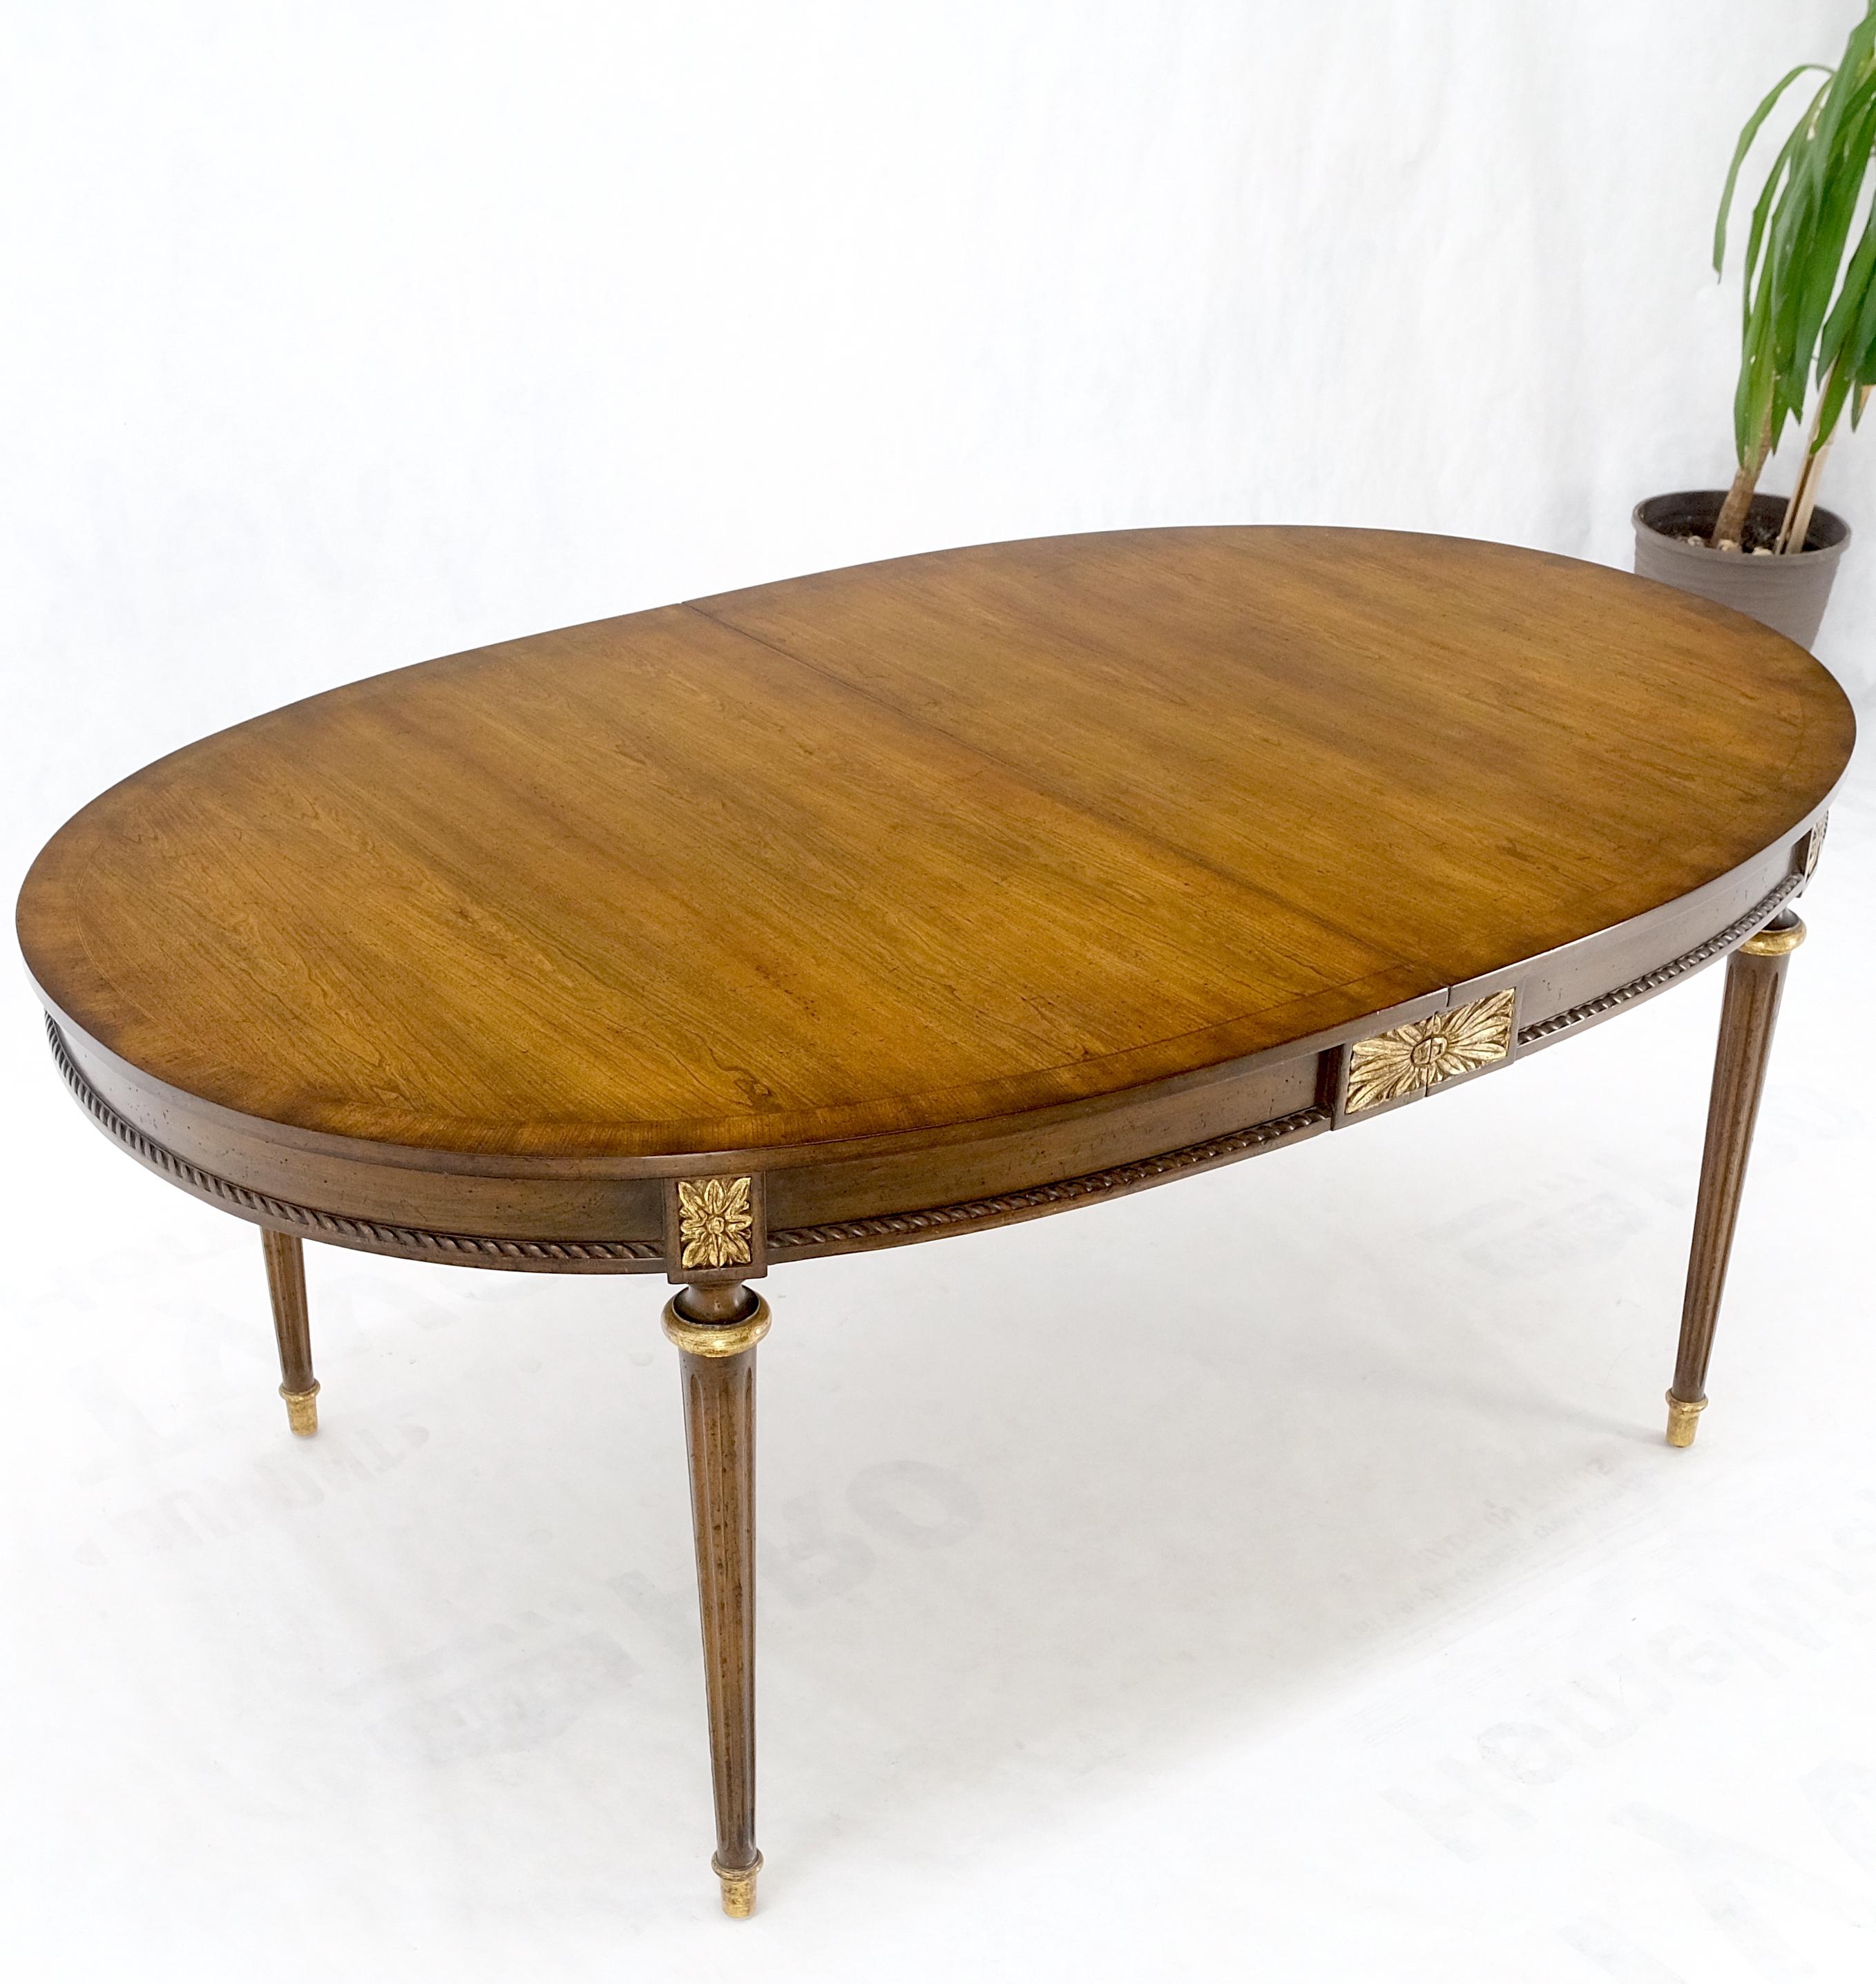 Walnut Fluted Baker Oval Three Leaves Gold Rossetts Large Dining Conference Table MINT!